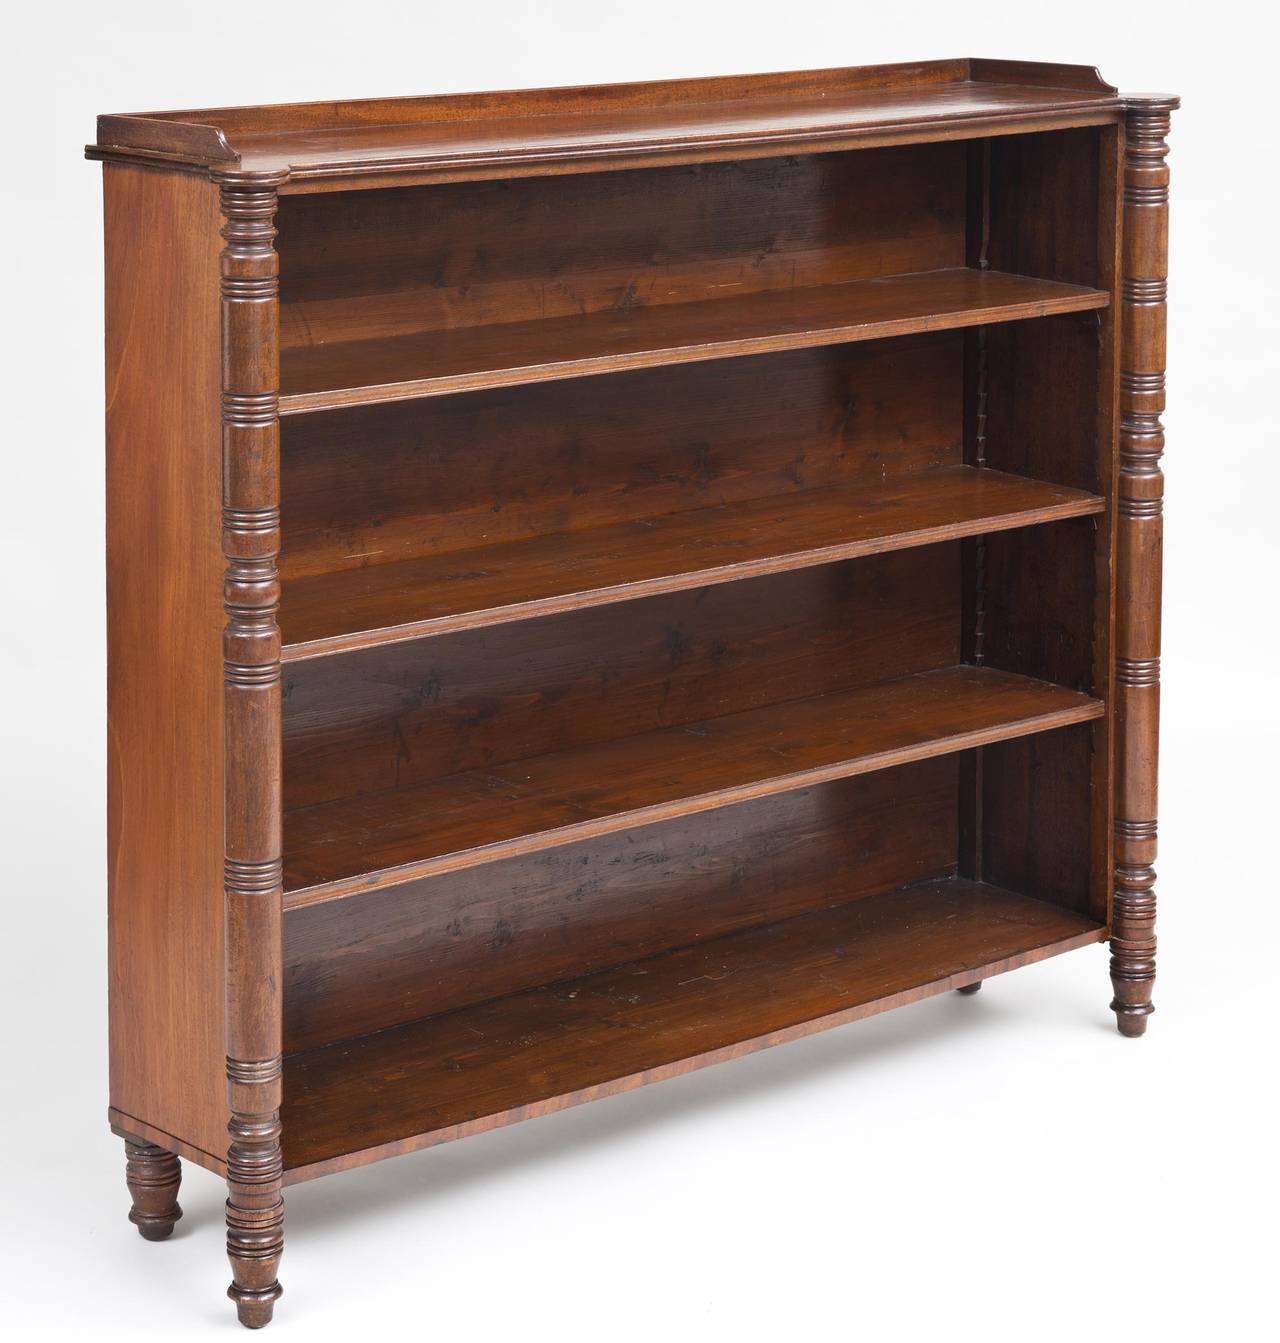 Regency mahogany open bookcase, the rectangular top with cookie-cutter corners and three-sided low gallery, above three adjustable shelves, turned column end supports on turned legs.

   